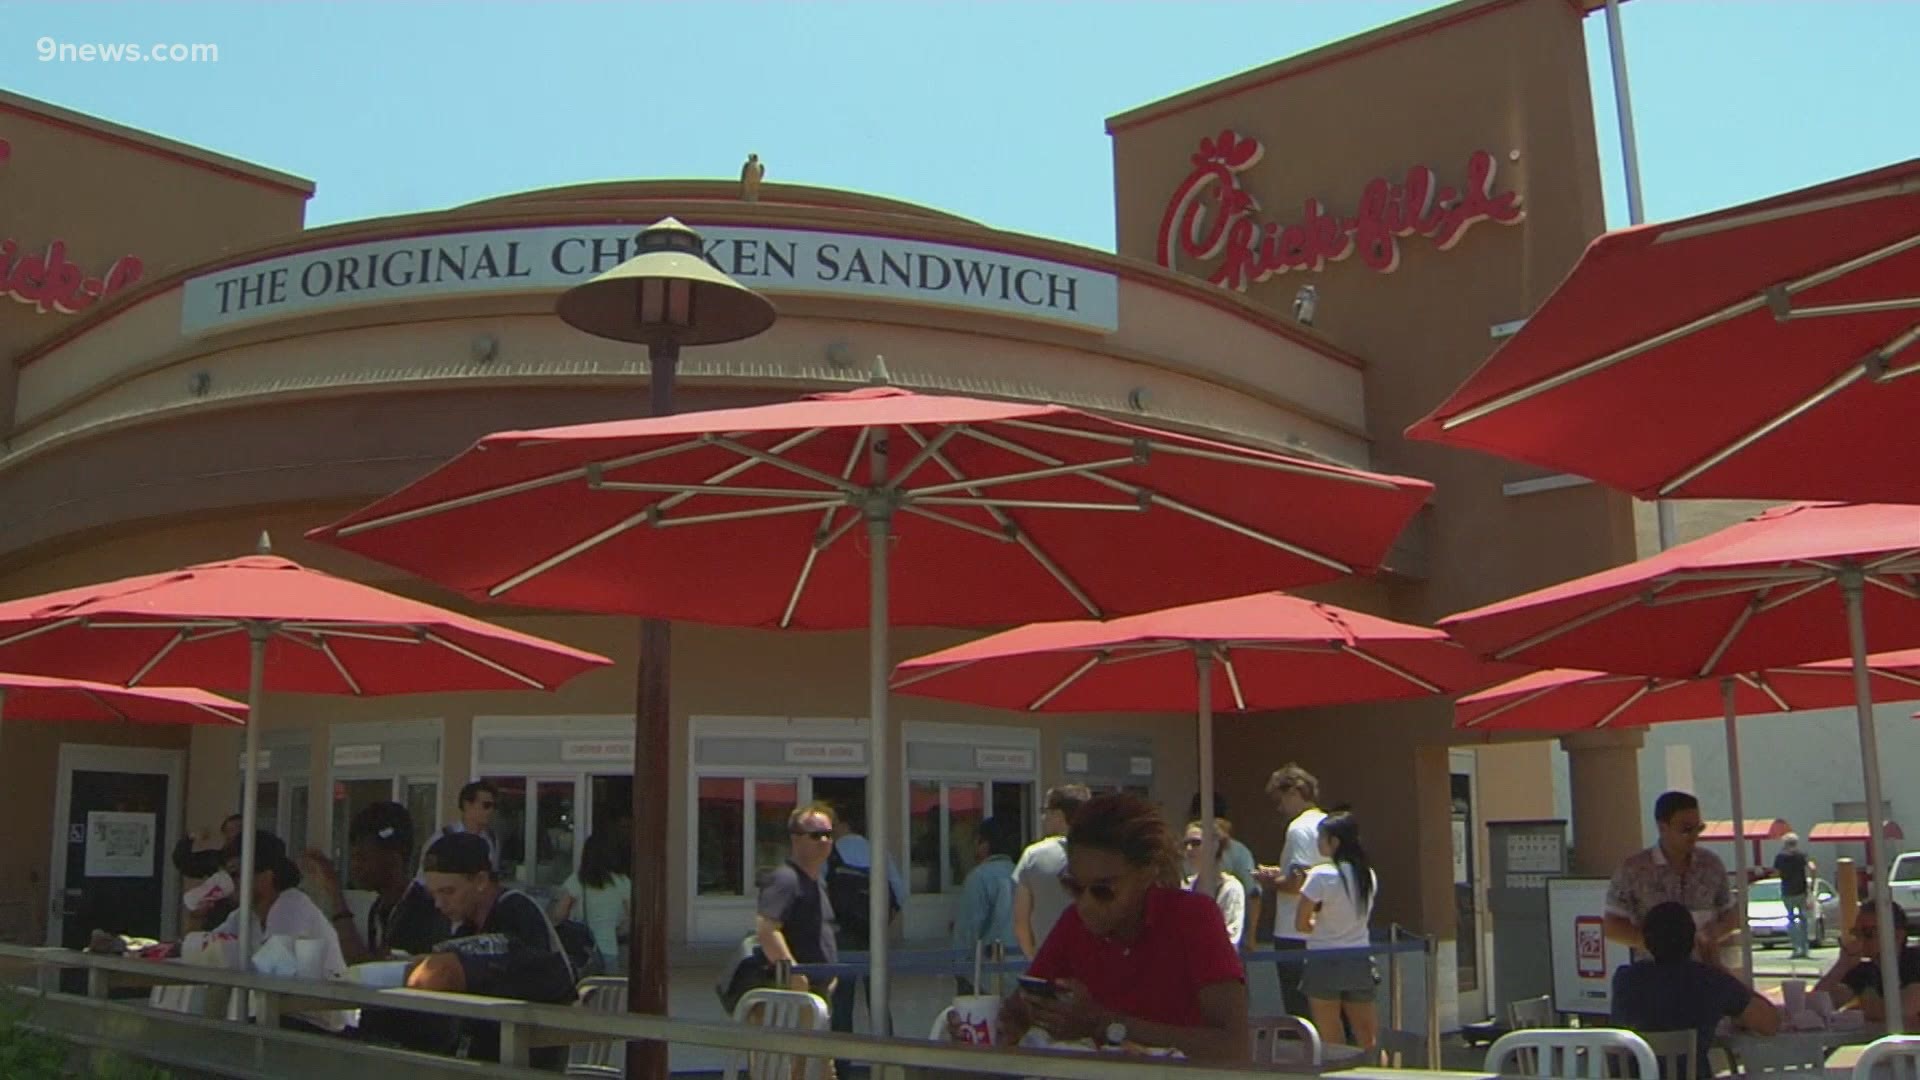 For the seventh year in a row, Chick-fil-A has claimed the top spot on the list of best fast food restaurants.